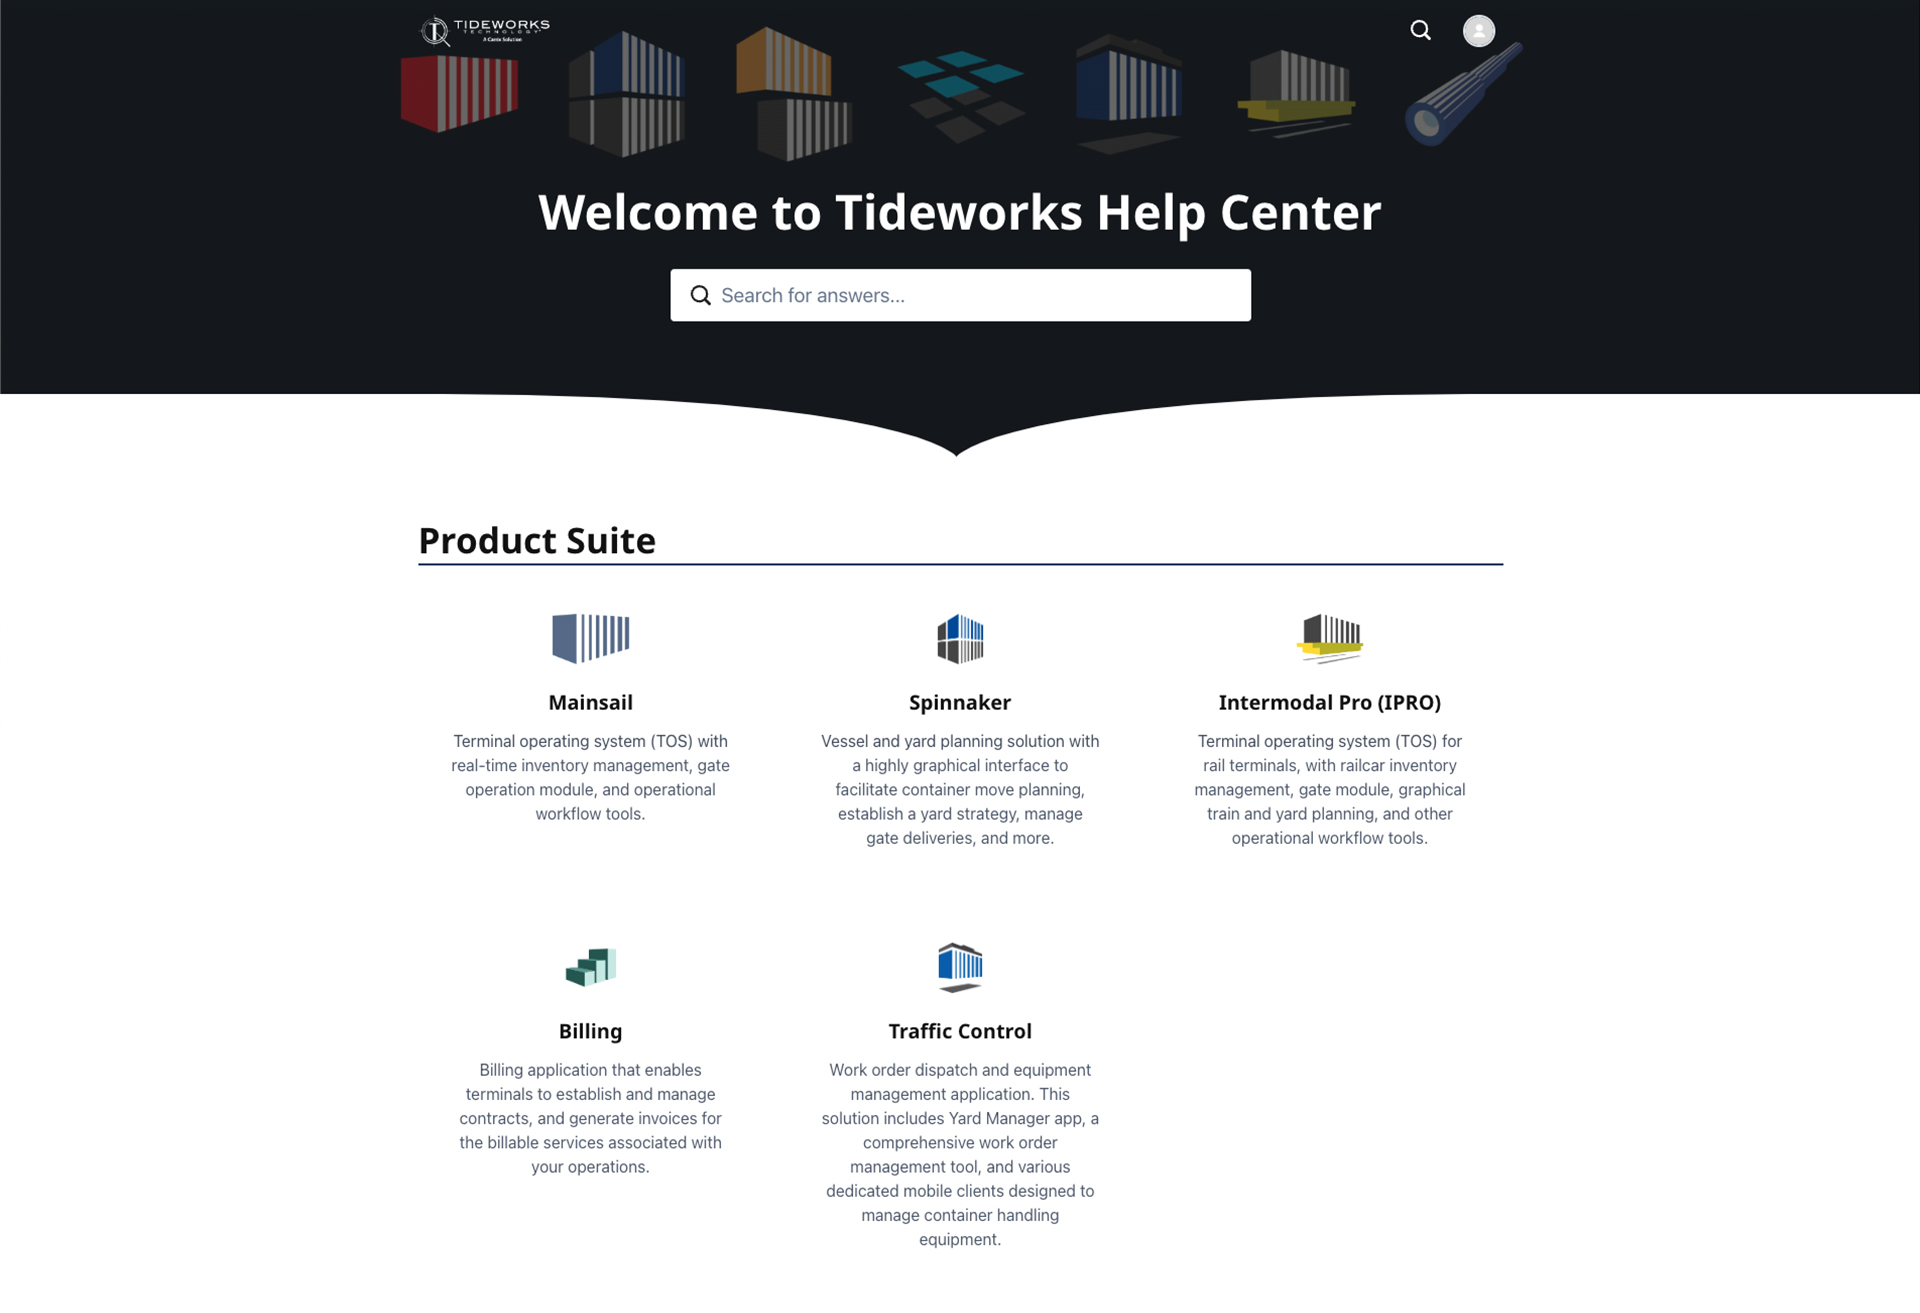 a screenshot of the home screen of Tideworks’ Help Center